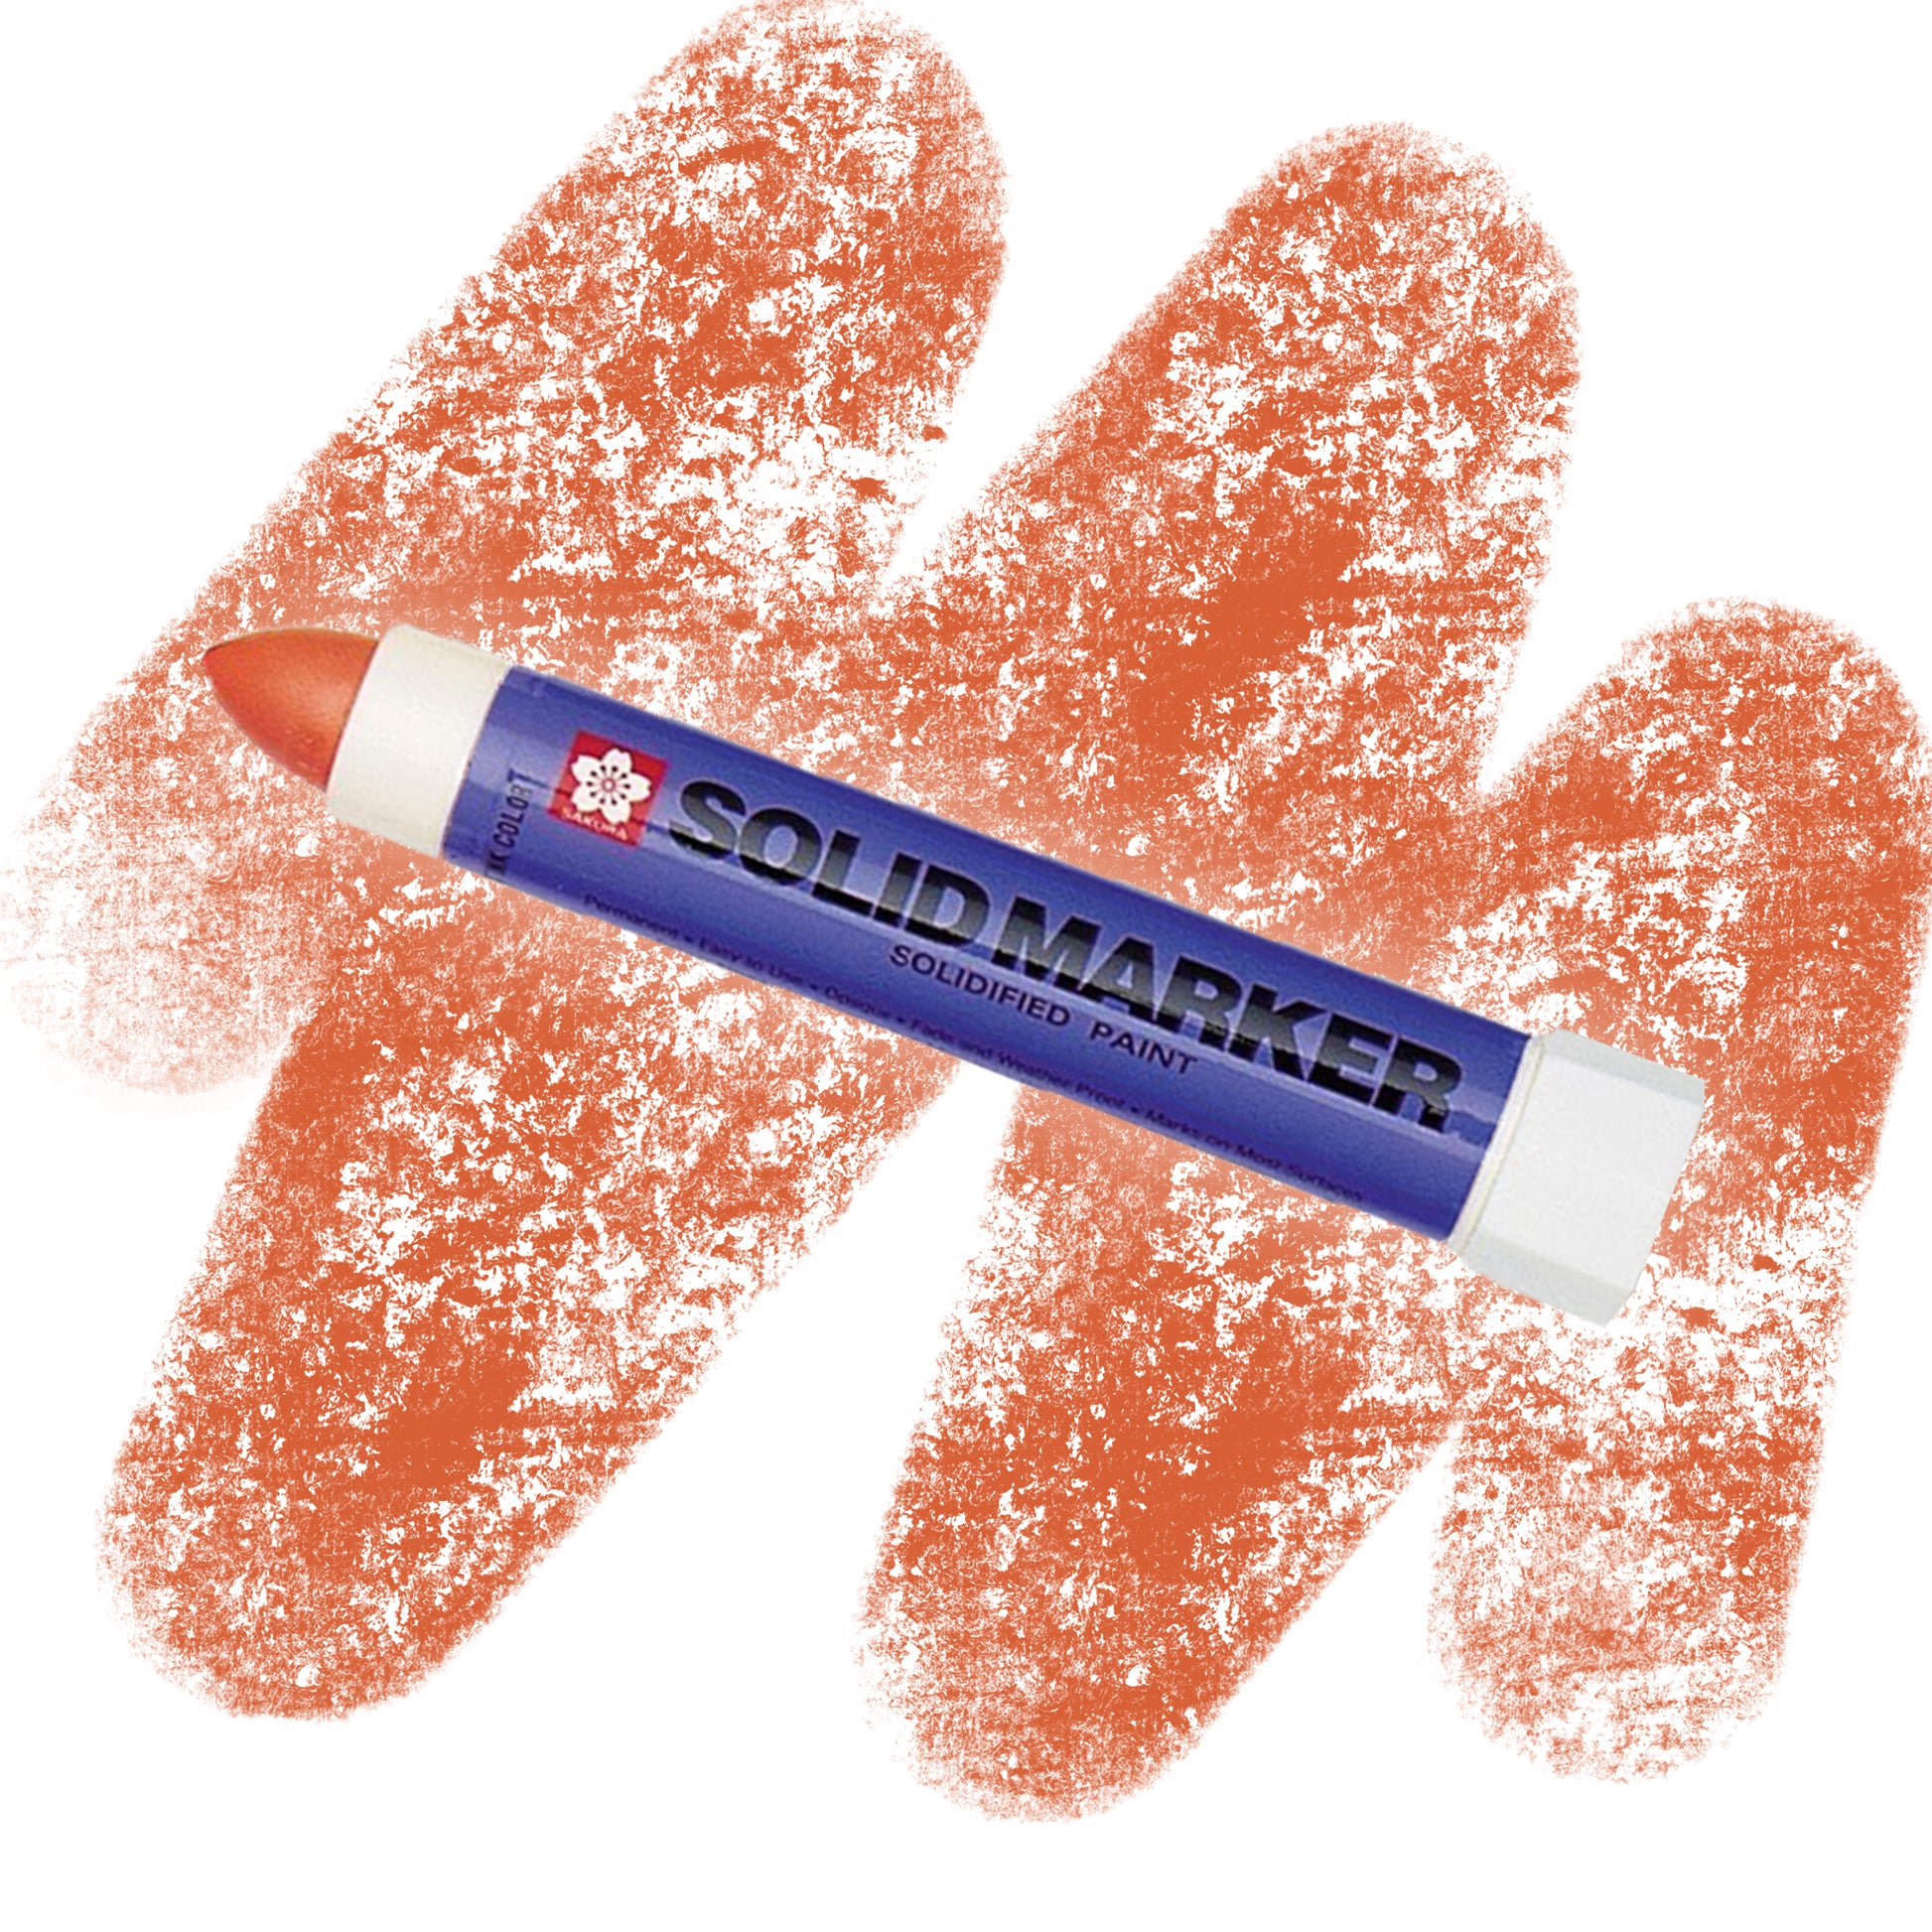 An orange marker with a purple label that reads " SOLID MARKER" with an orange crayon swatch.